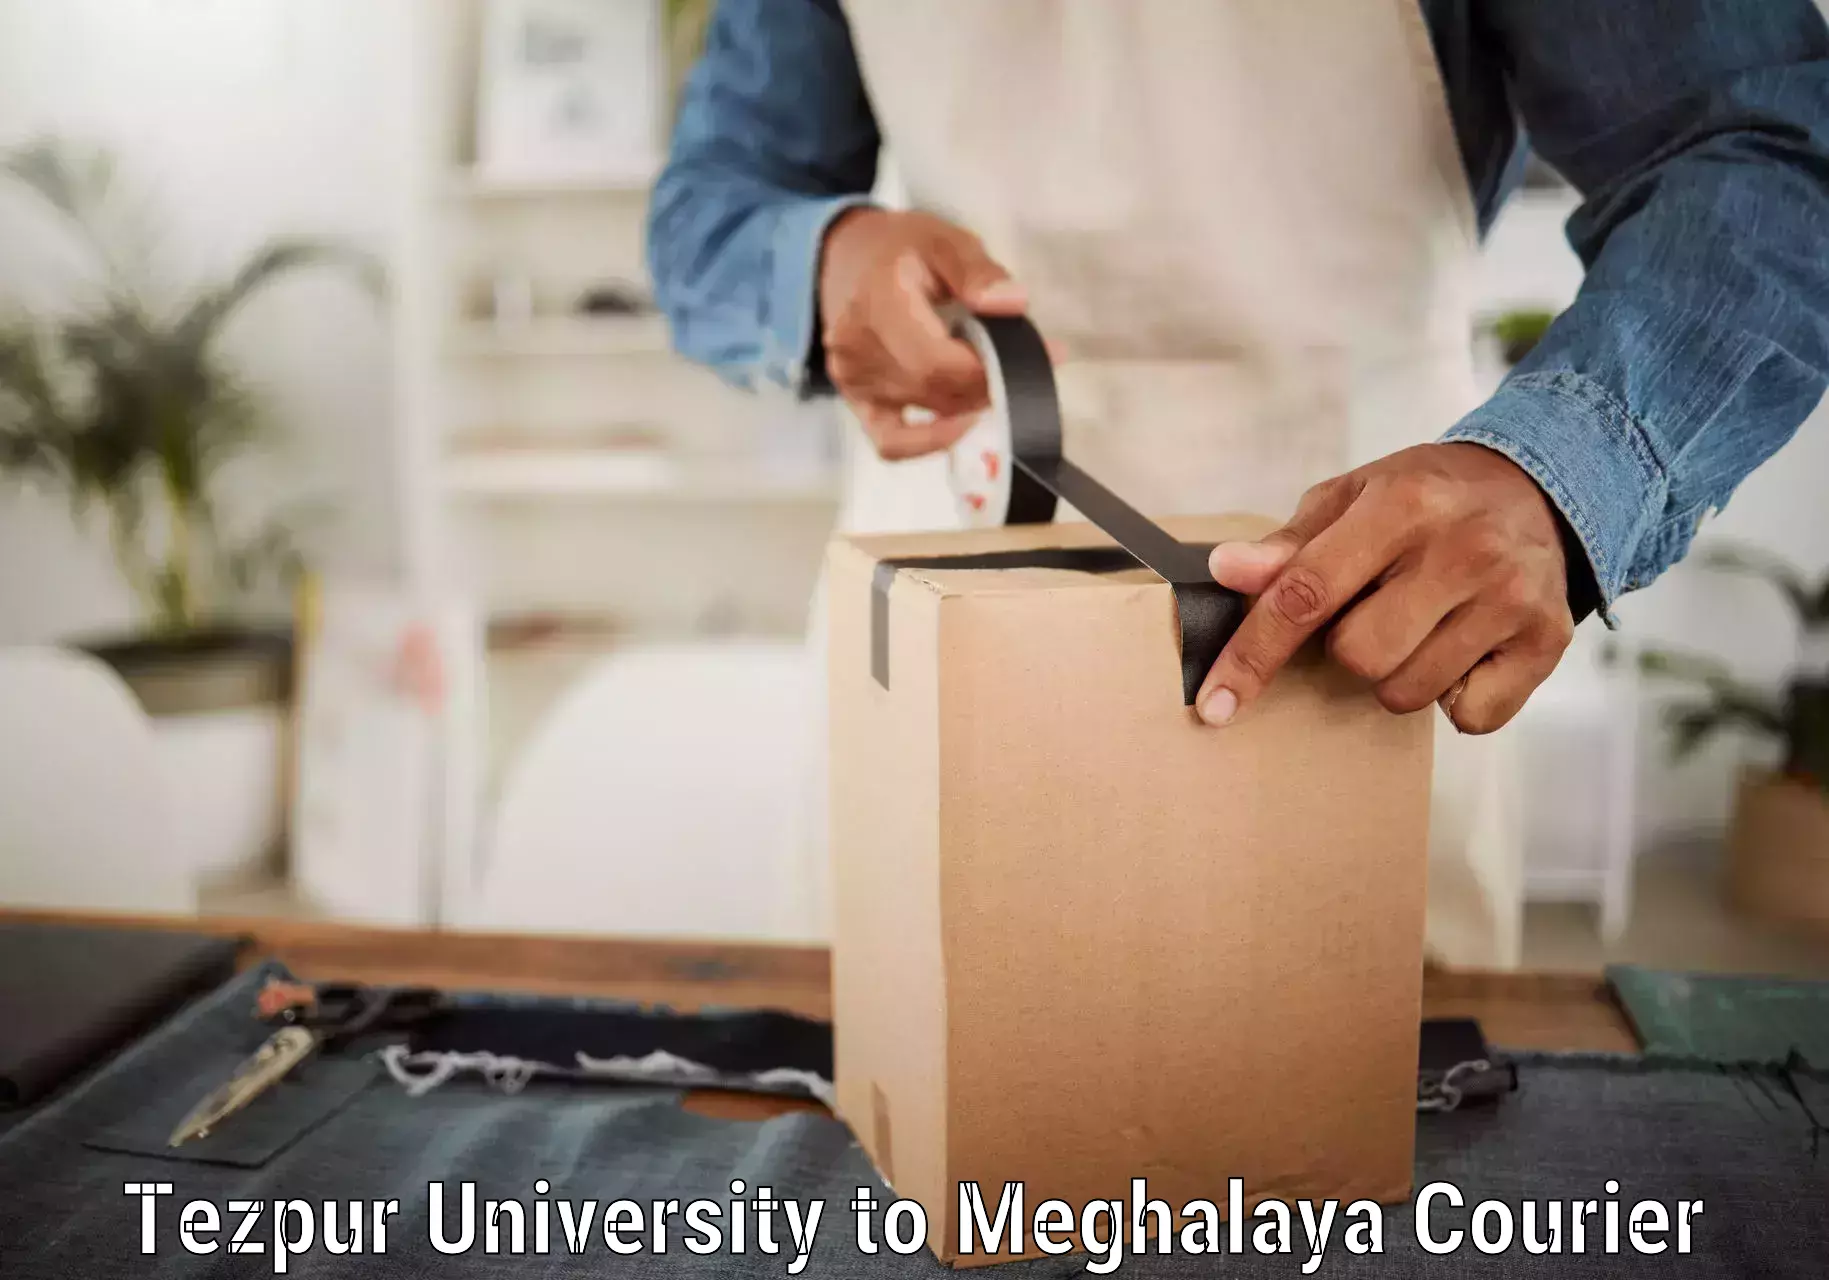 Ocean freight courier in Tezpur University to Meghalaya